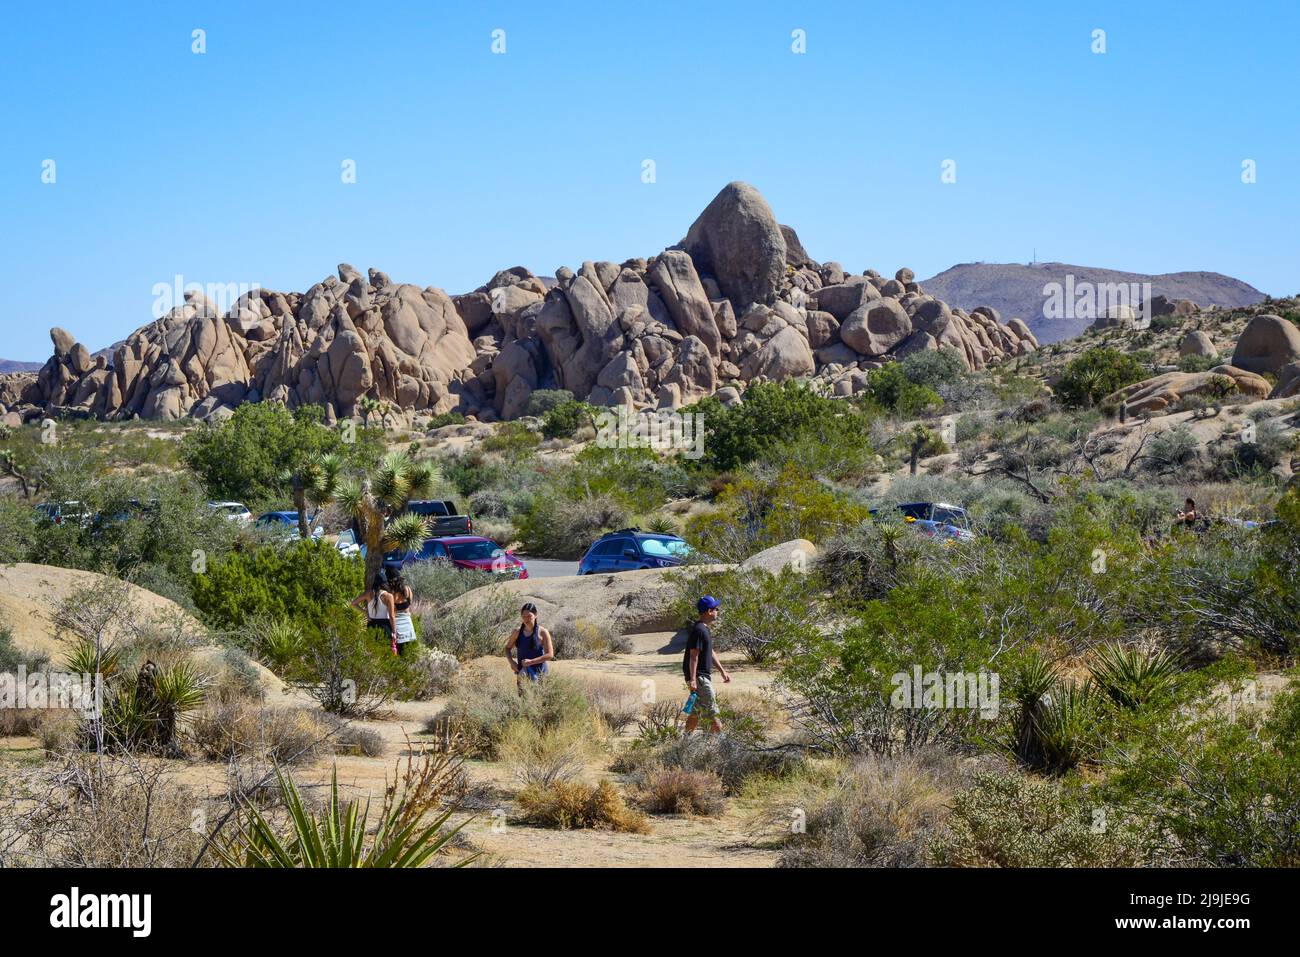 'Skull Rock', A landmark in the Joshua Tree National Park is climbed on by tourists on the uniquely created boulders, in the Mojave desert, CA Stock Photo